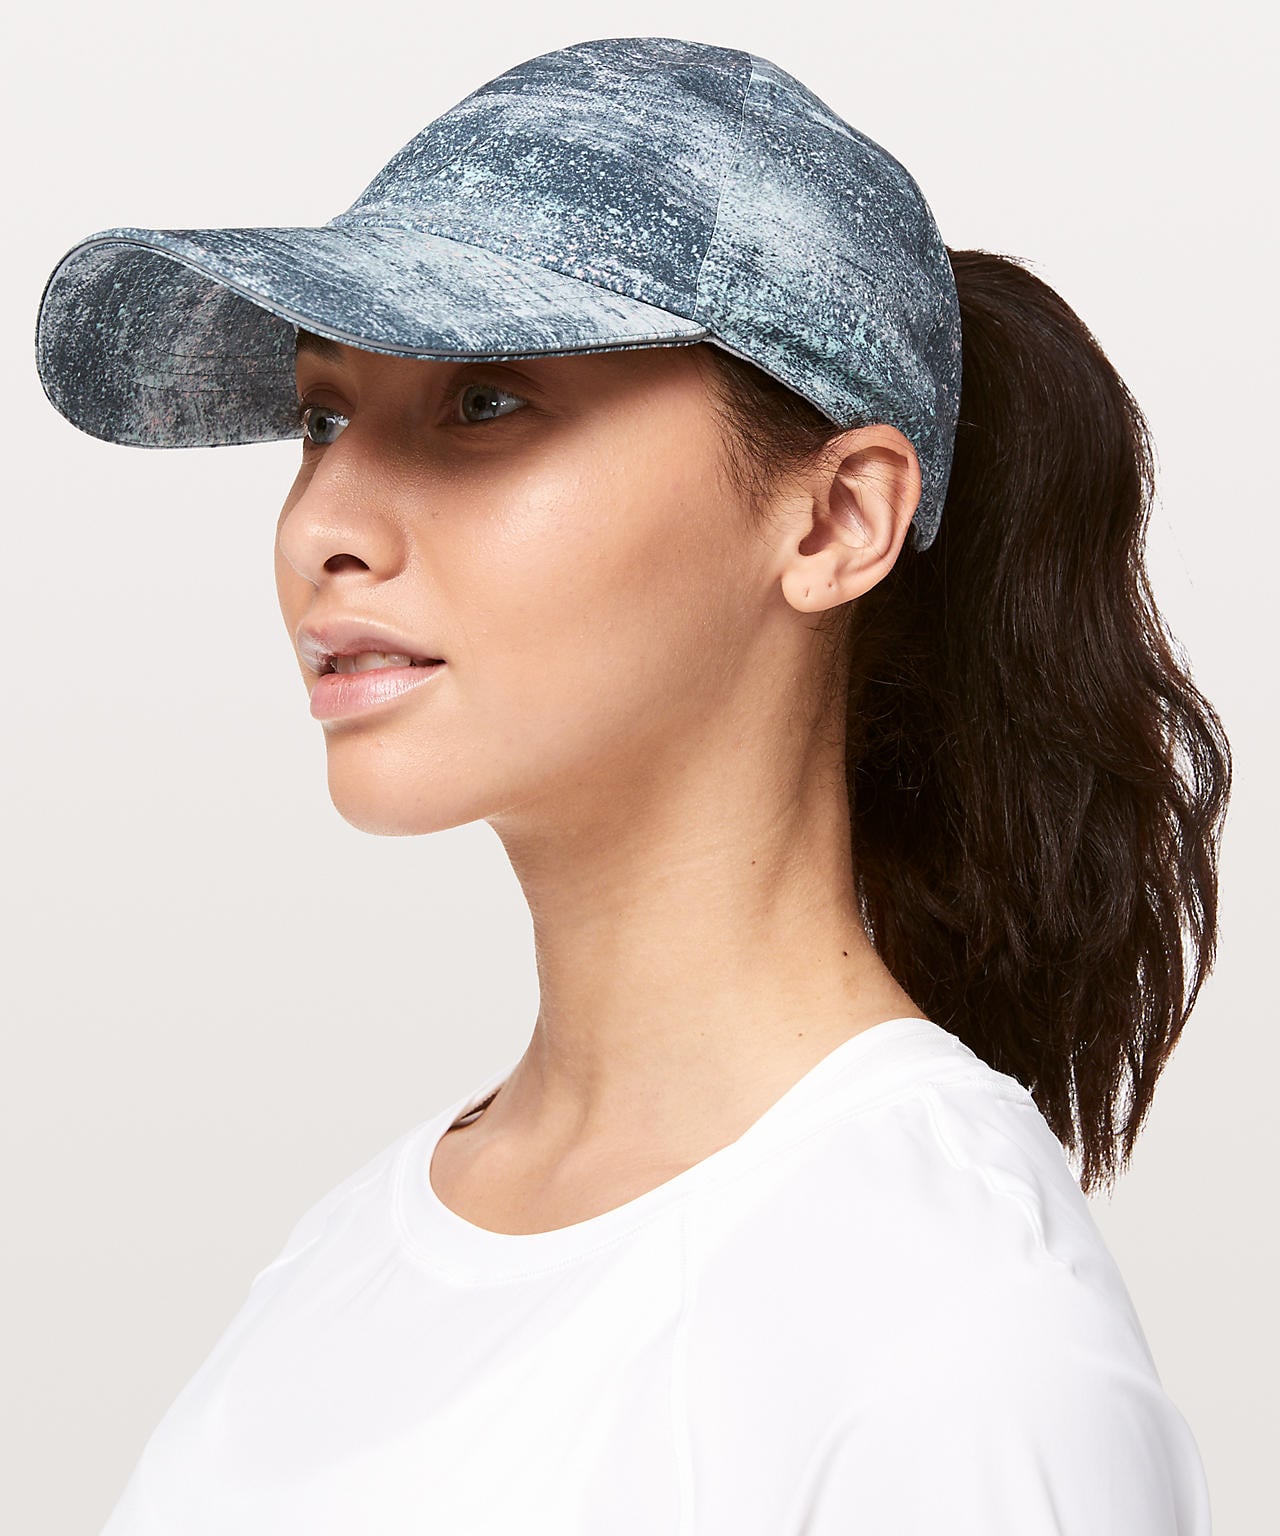 cool caps for women